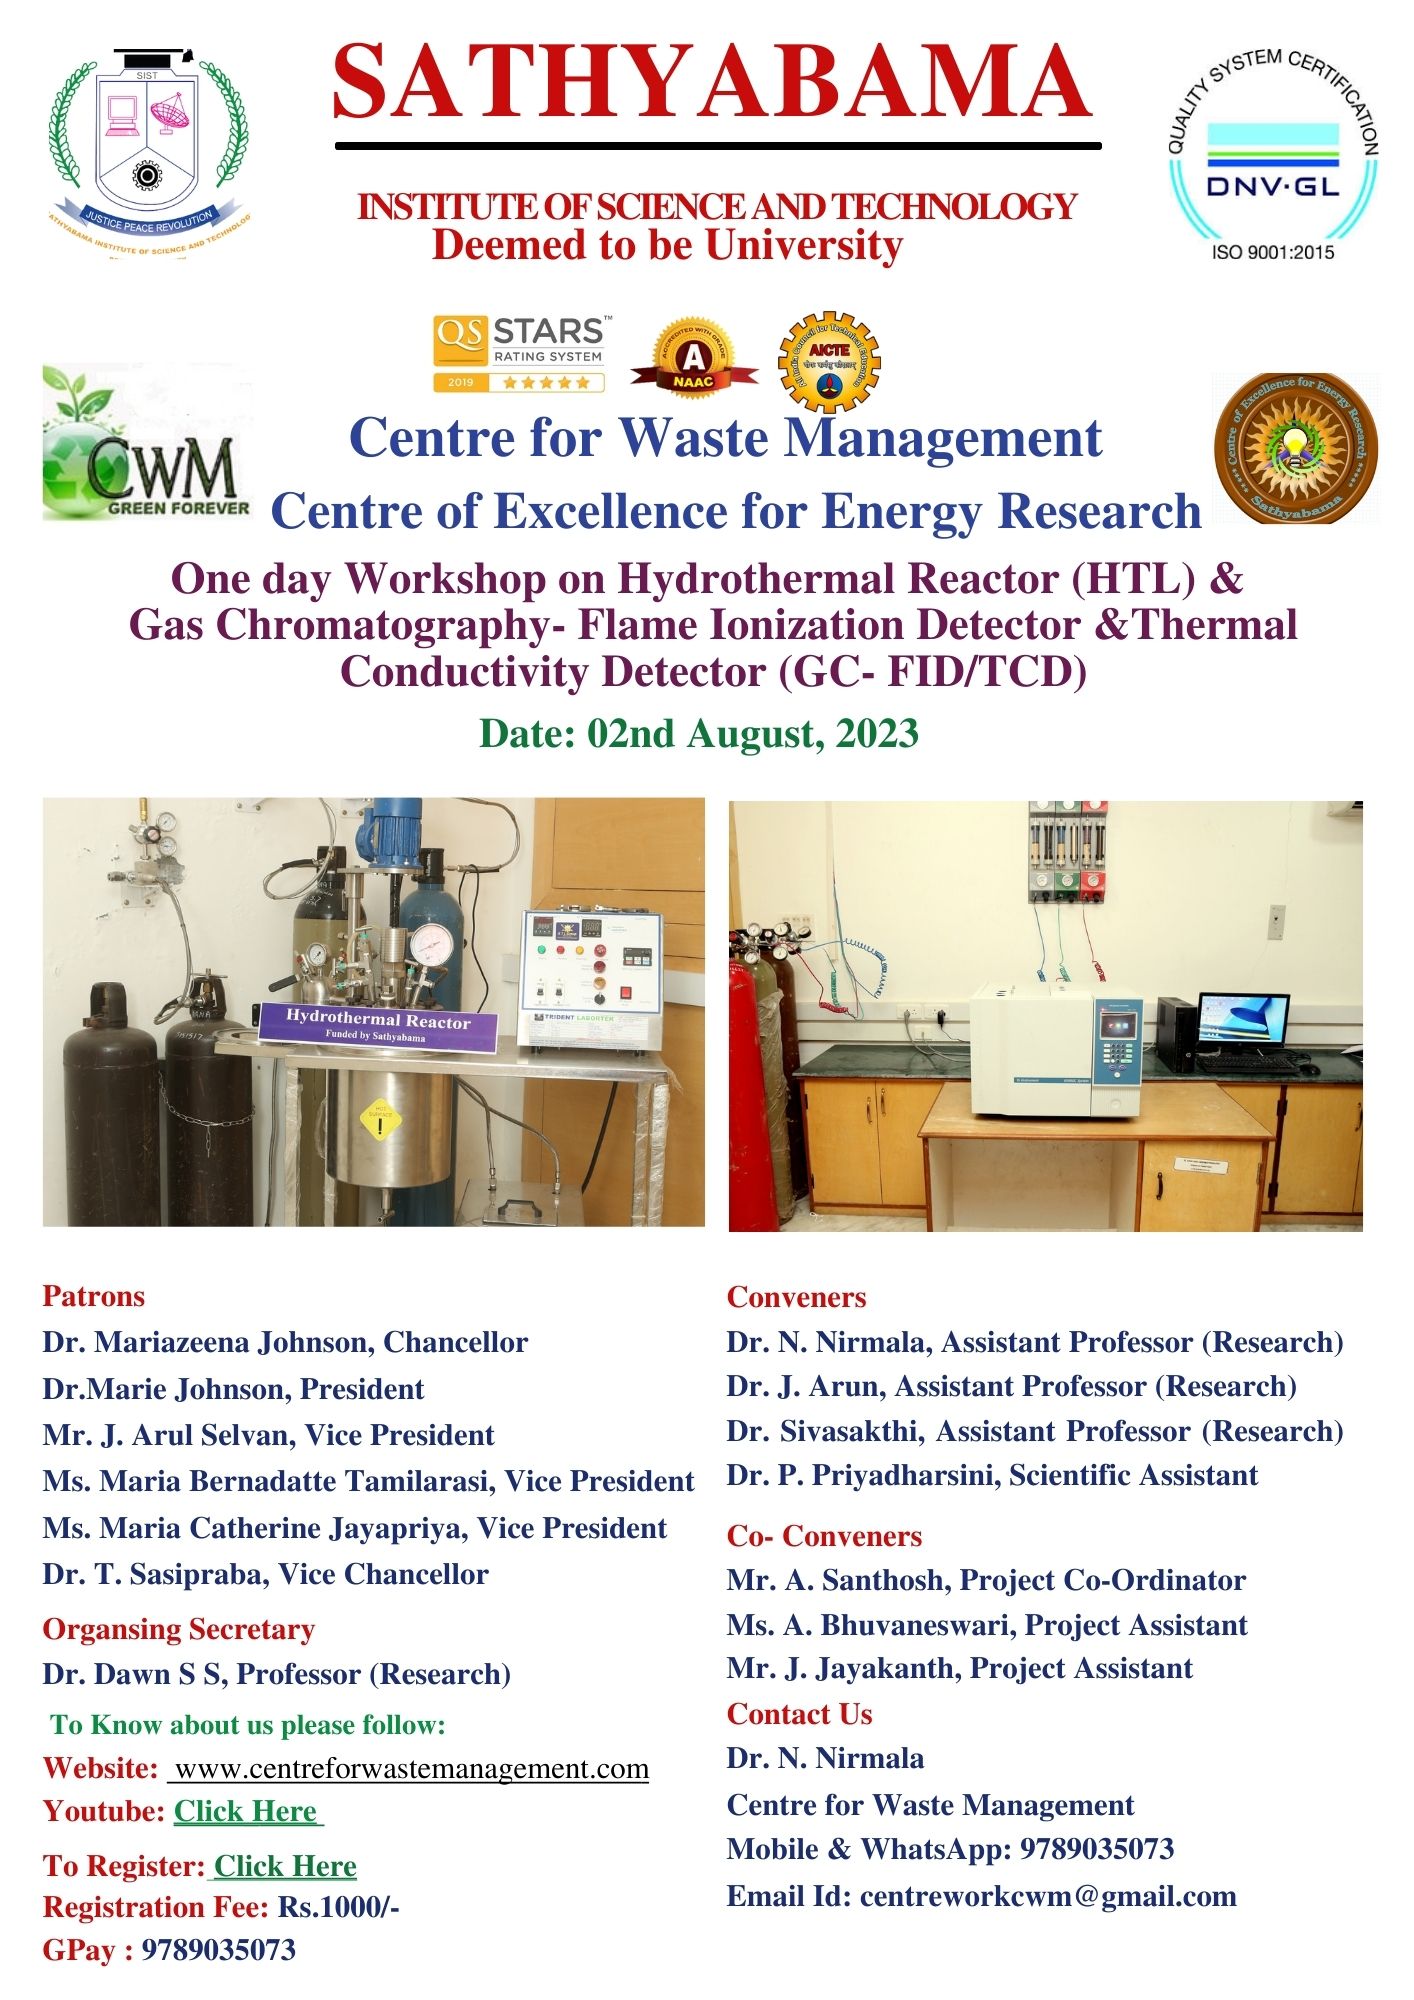 One Day Workshop on Hydrothermal Reactor and Gas Chromatography- Flame Ionization Detector - Thermal Conductivity Detector (GC- FID/TCD) 2023